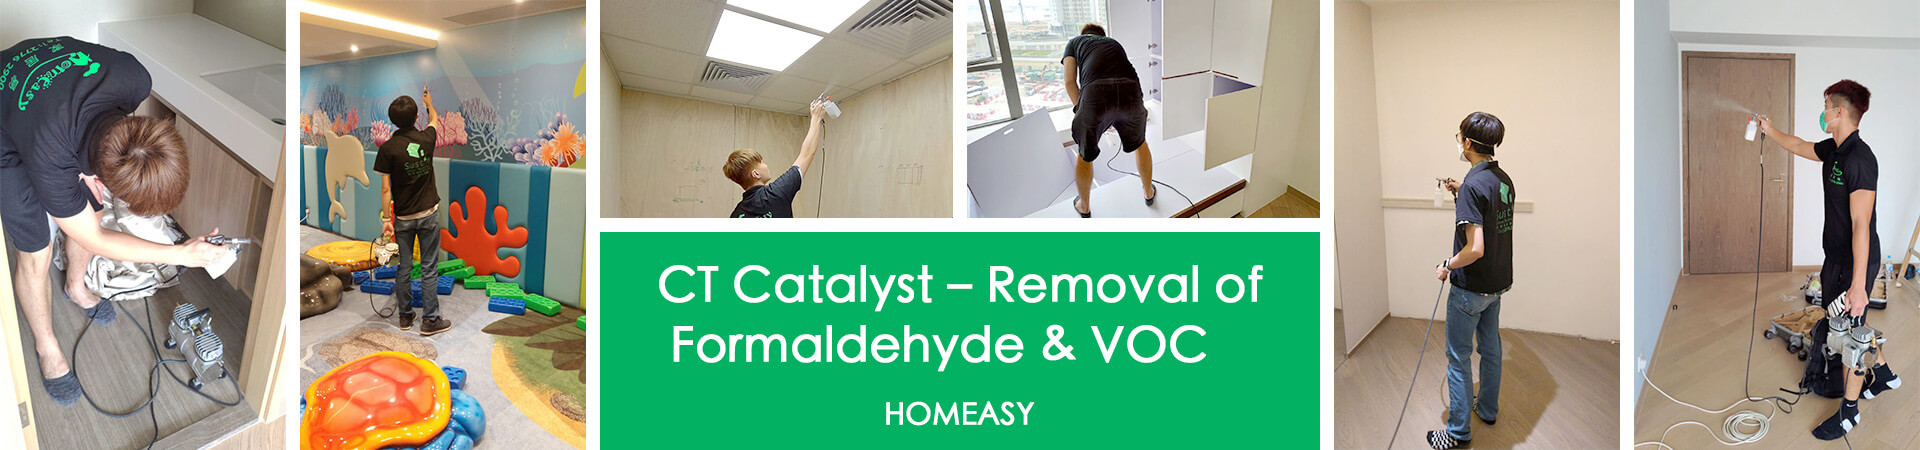 CT Catalyst - Formaldehyde Removal - Air Purification | Homeasy